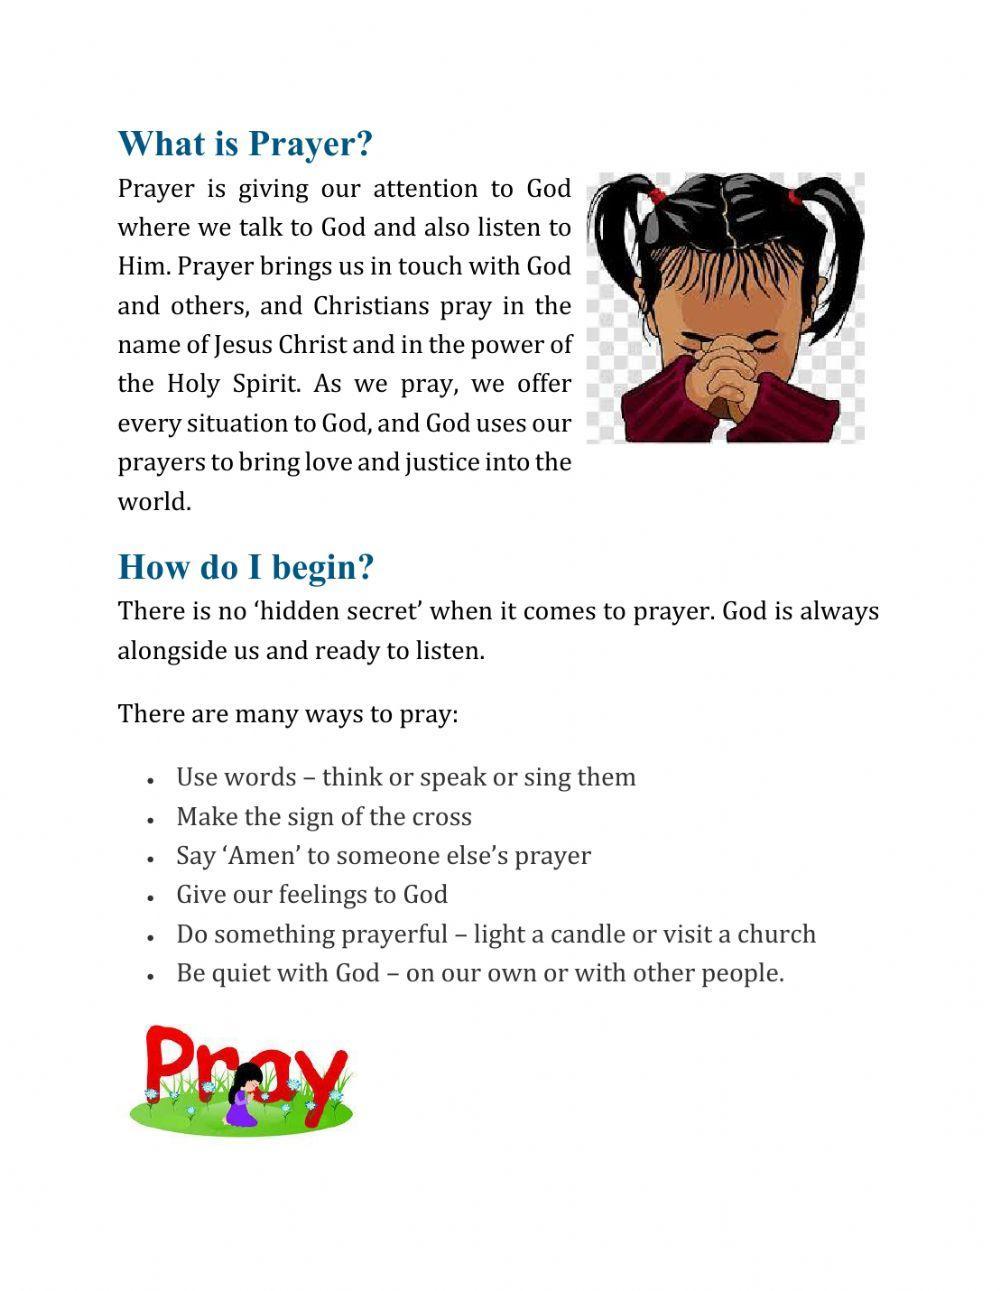 What is prayer